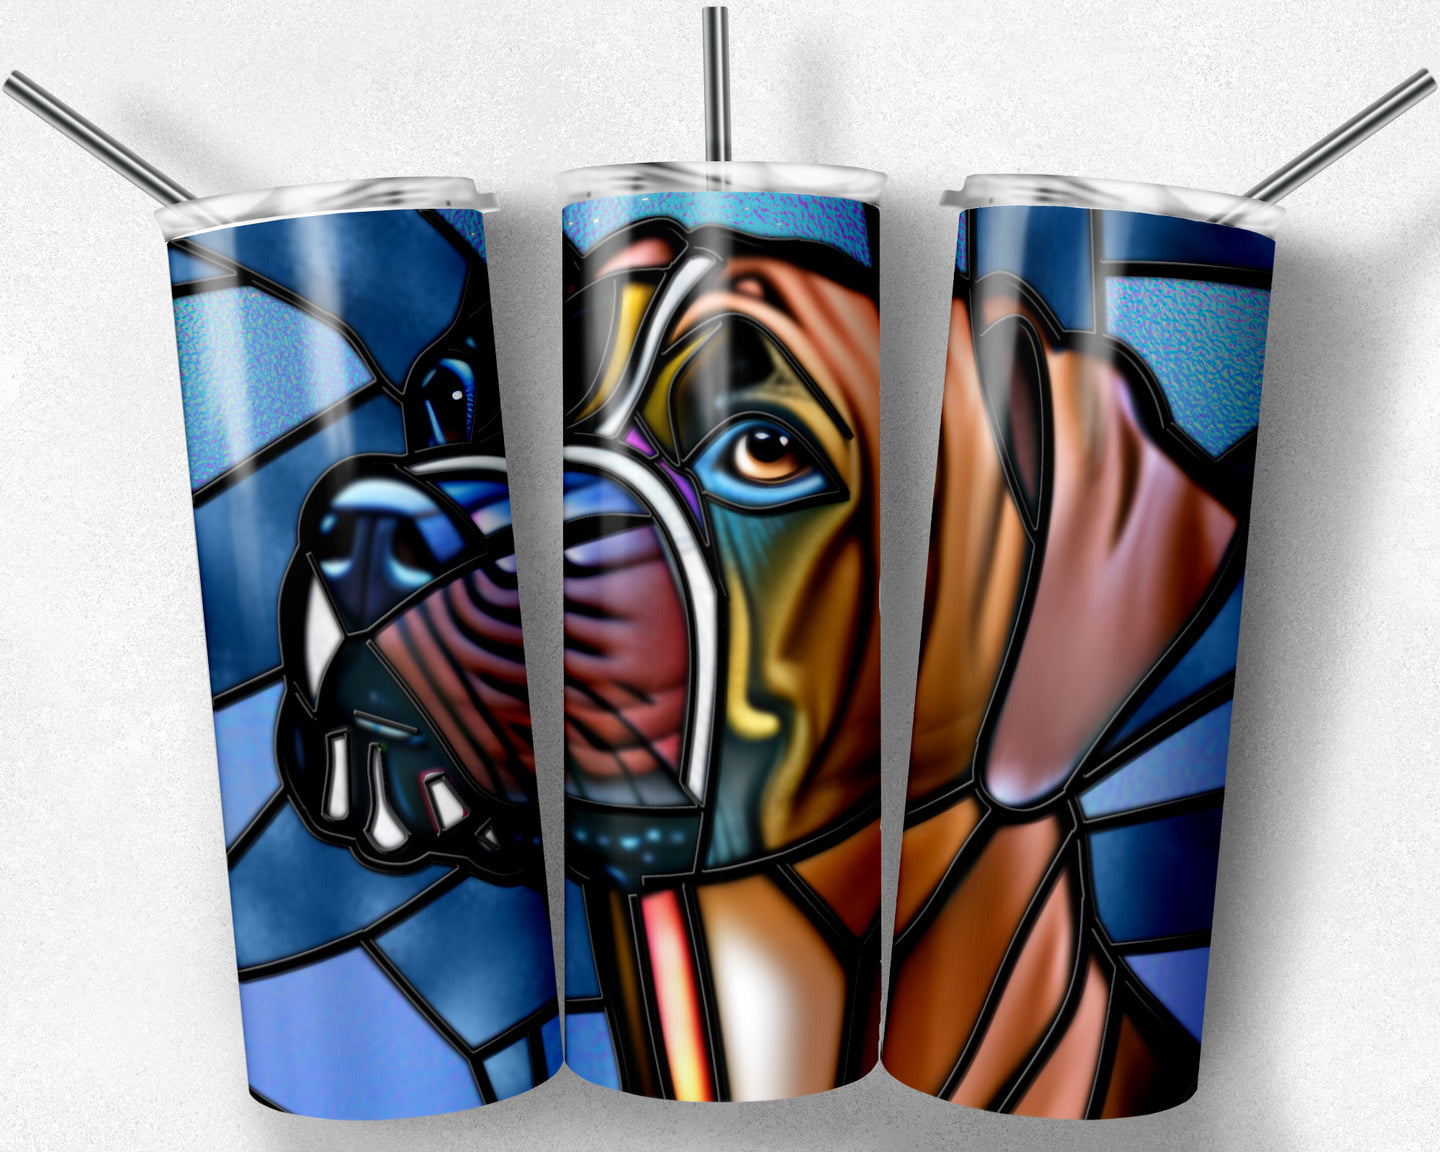 Artistic  Boxer Dog Stained Glass